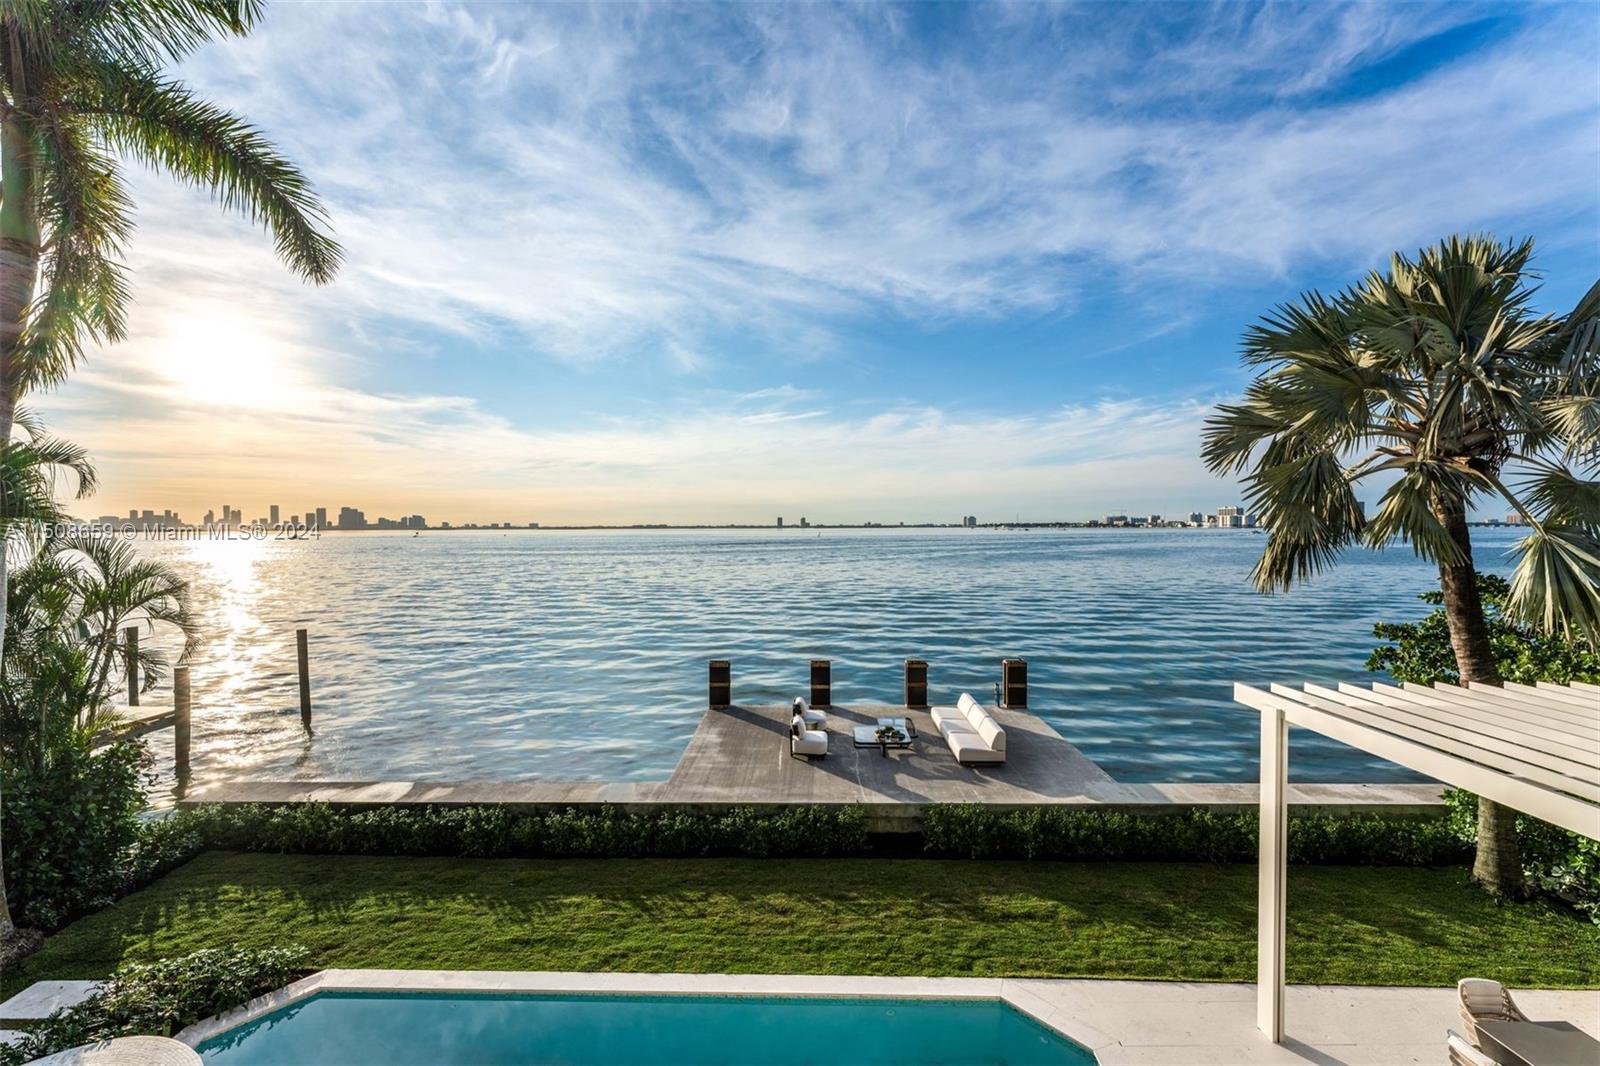 5310 N Bay Rd, Miami Beach, Florida, 33140, United States, 6 Bedrooms Bedrooms, ,9 BathroomsBathrooms,Residential,For Sale,5310 N Bay Rd,1424189